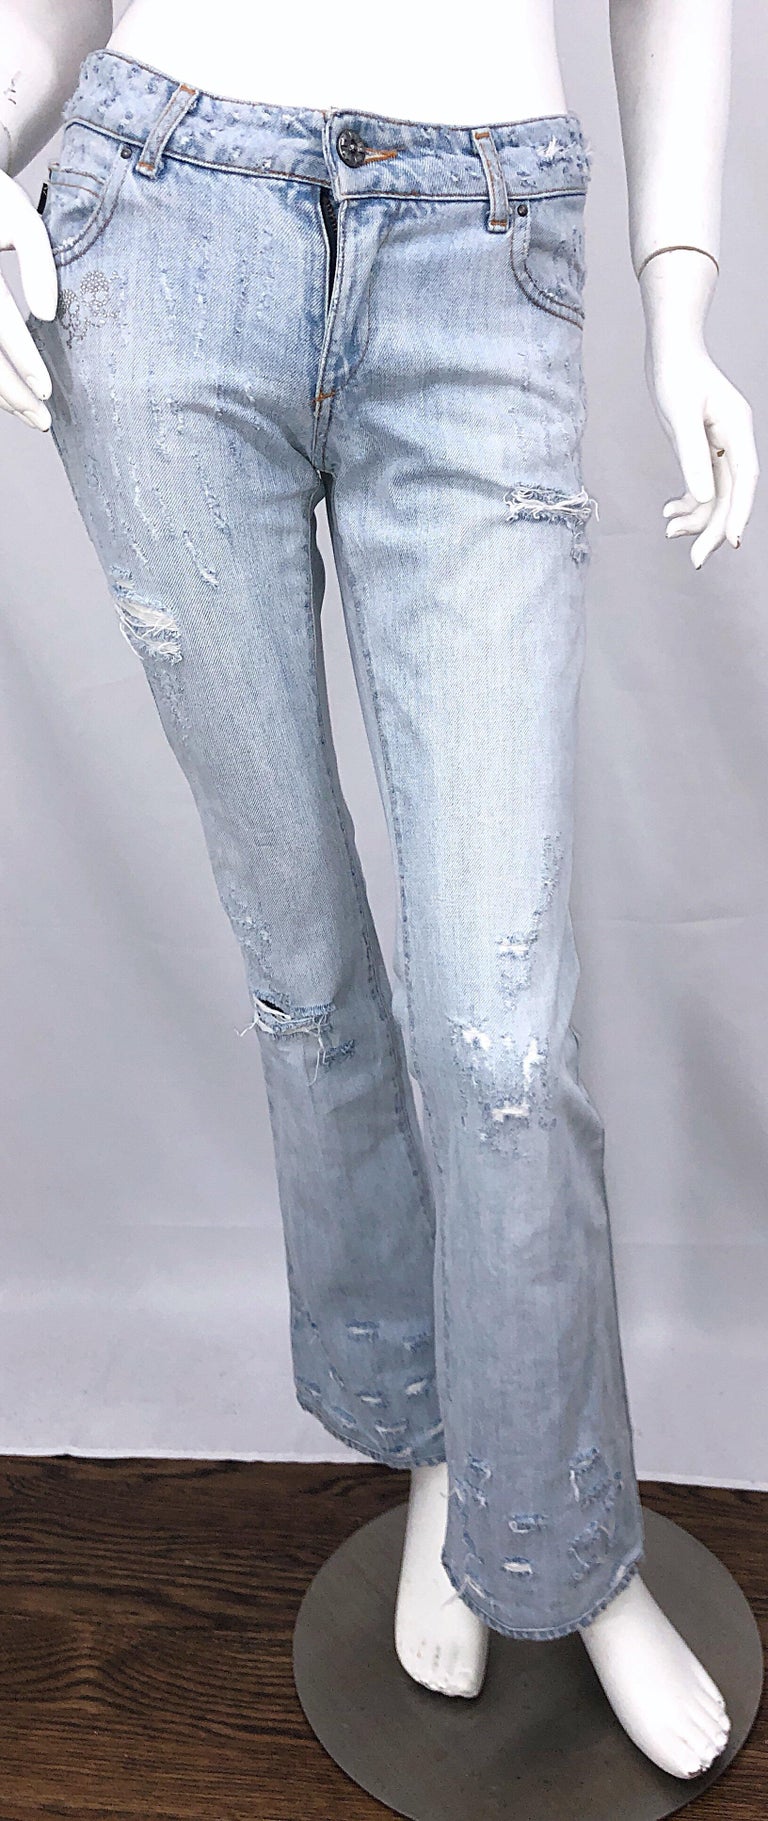 Bedazzled Jeans 2000s | lupon.gov.ph